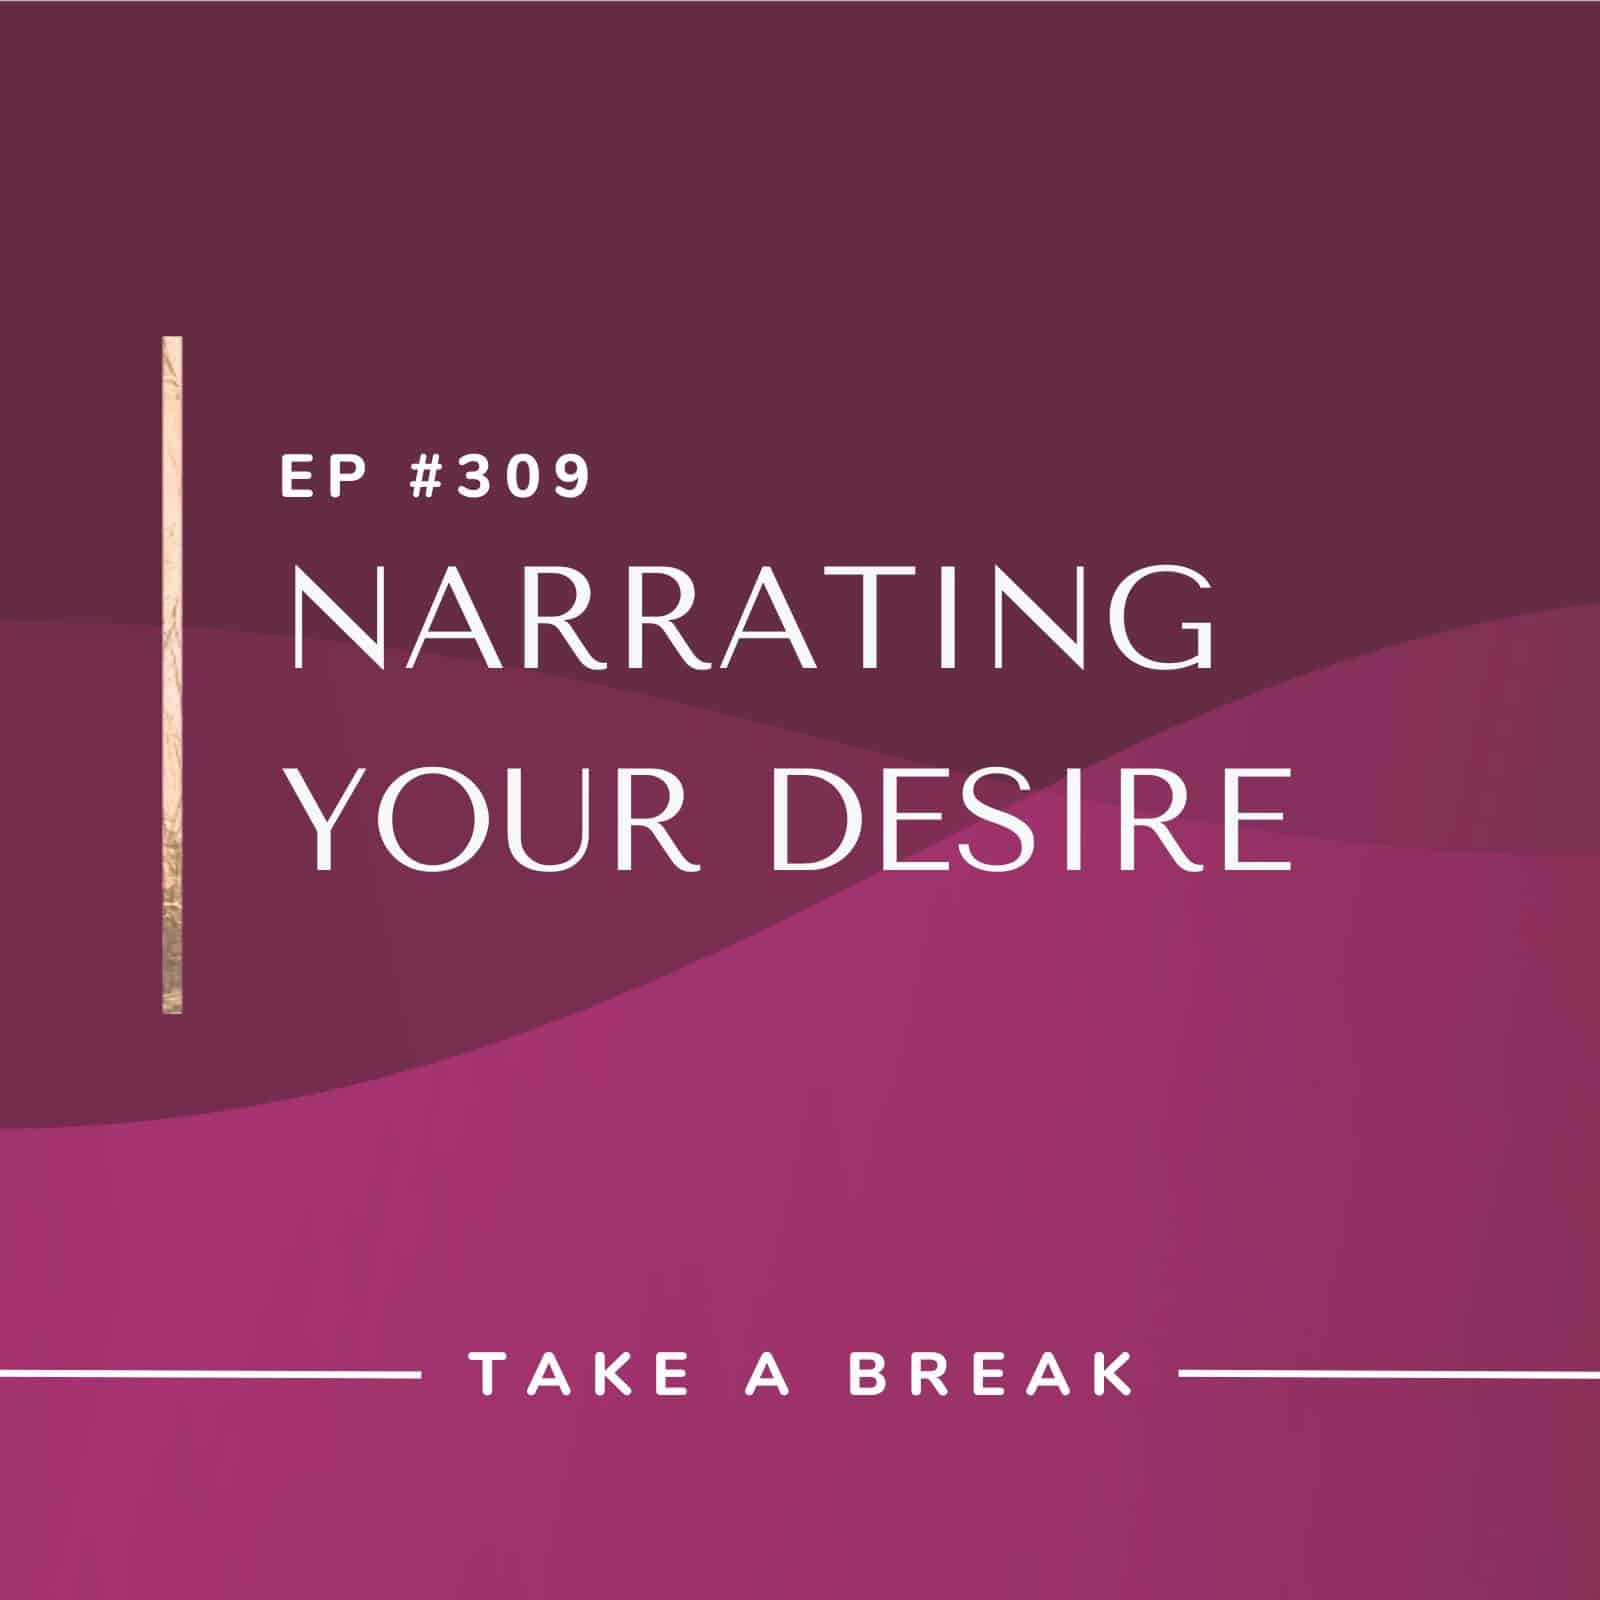 Take A Break from Drinking | Narrating Your Desire